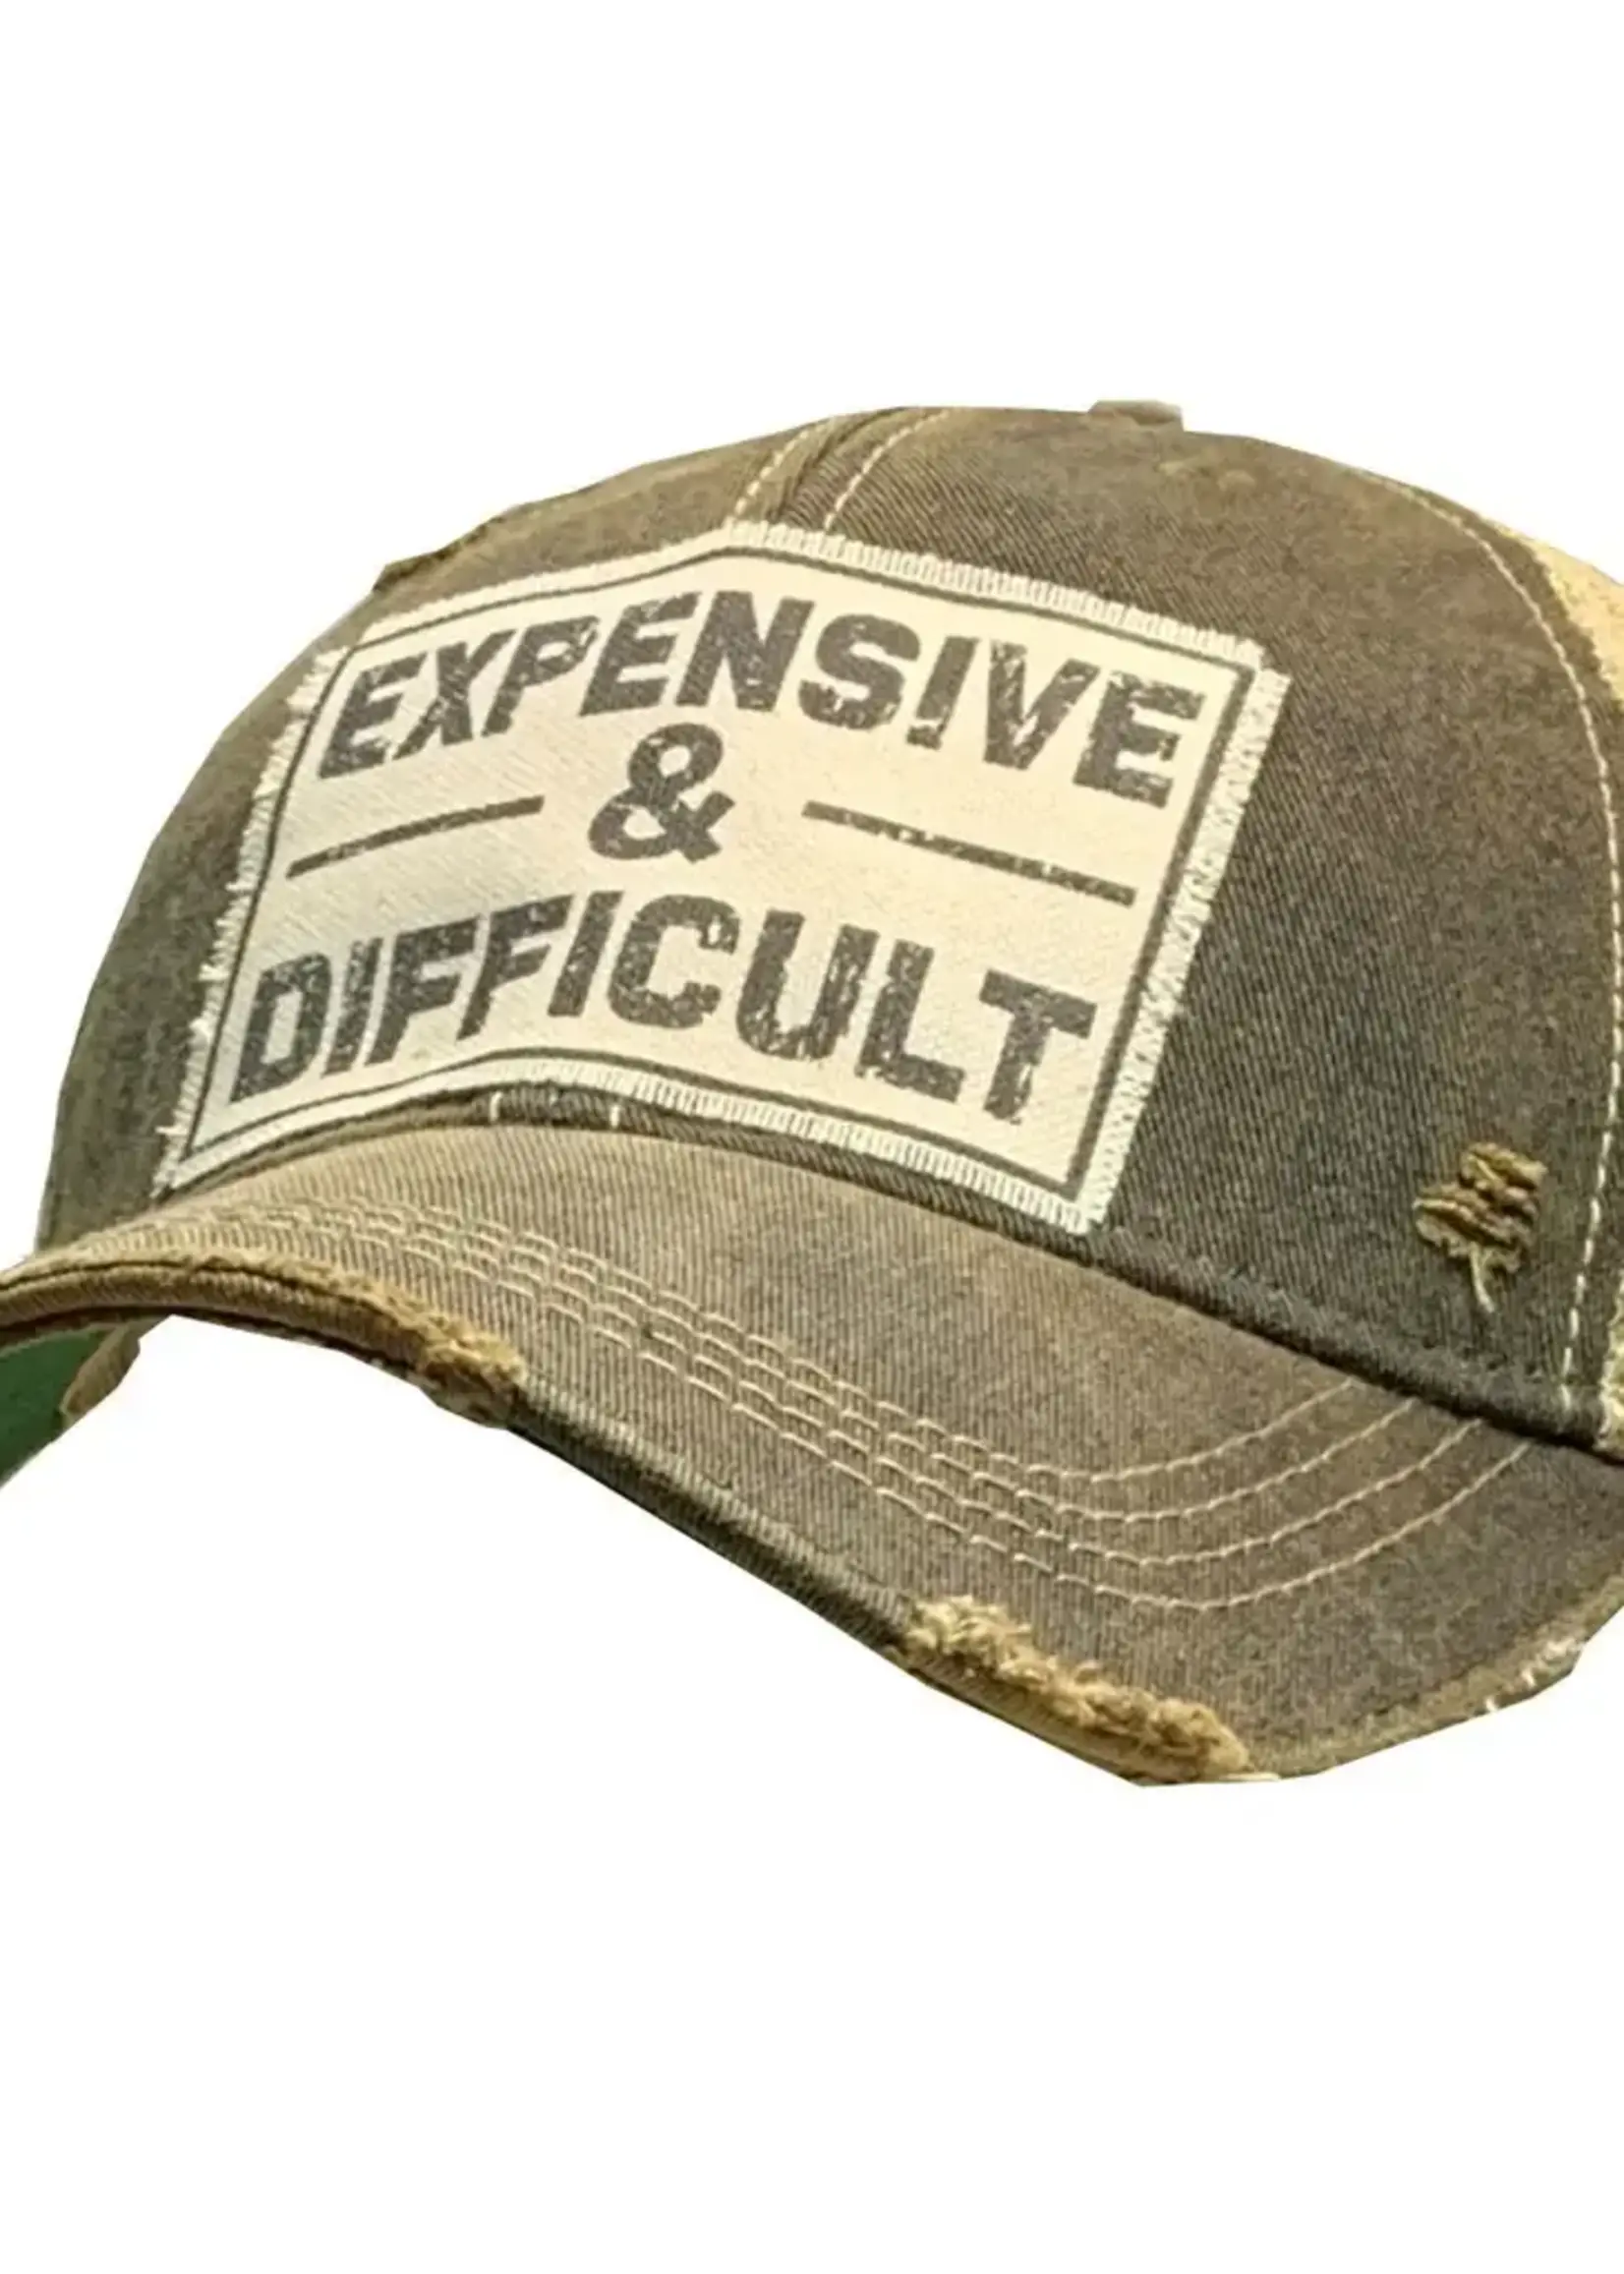 Vintage Life Trucker Hat Expensive & Difficult